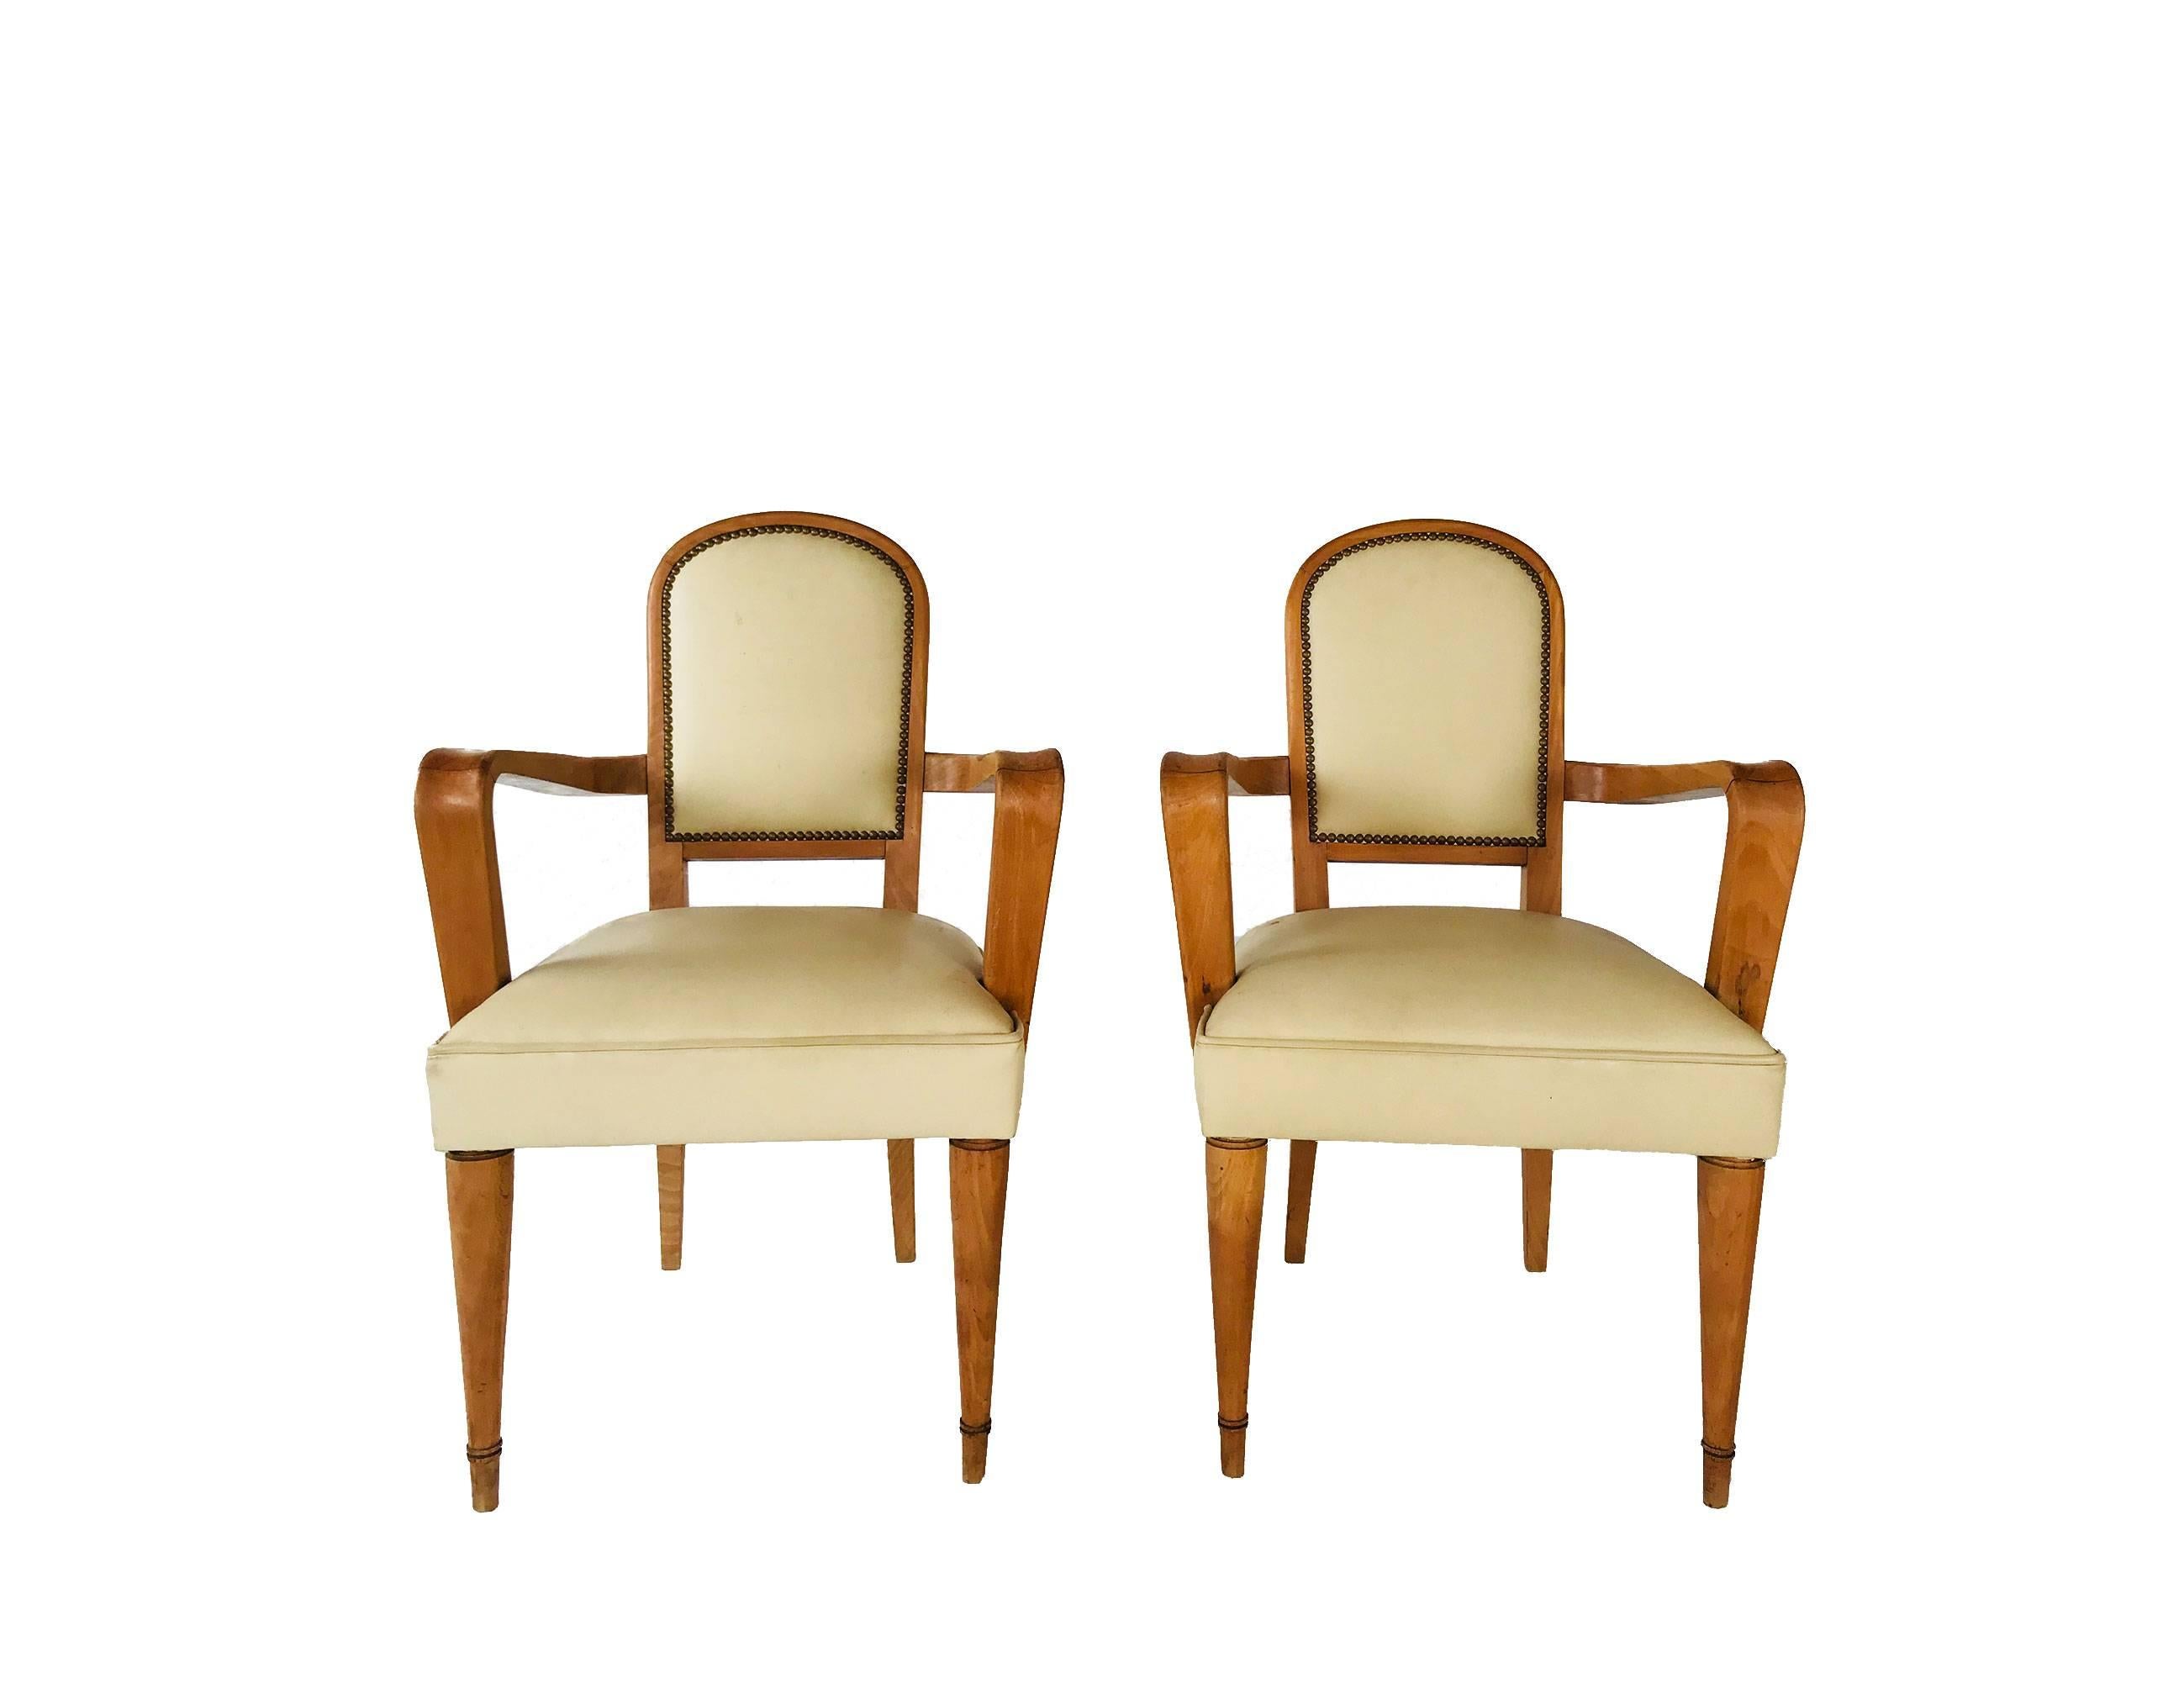 Elegant pair of French armchairs featuring beautifully curved arms, rounded back and original faux leather upholstery with brass nailhead detail. Classic French 40s with great scale and proportion.

Measures: Seat height : 18.5